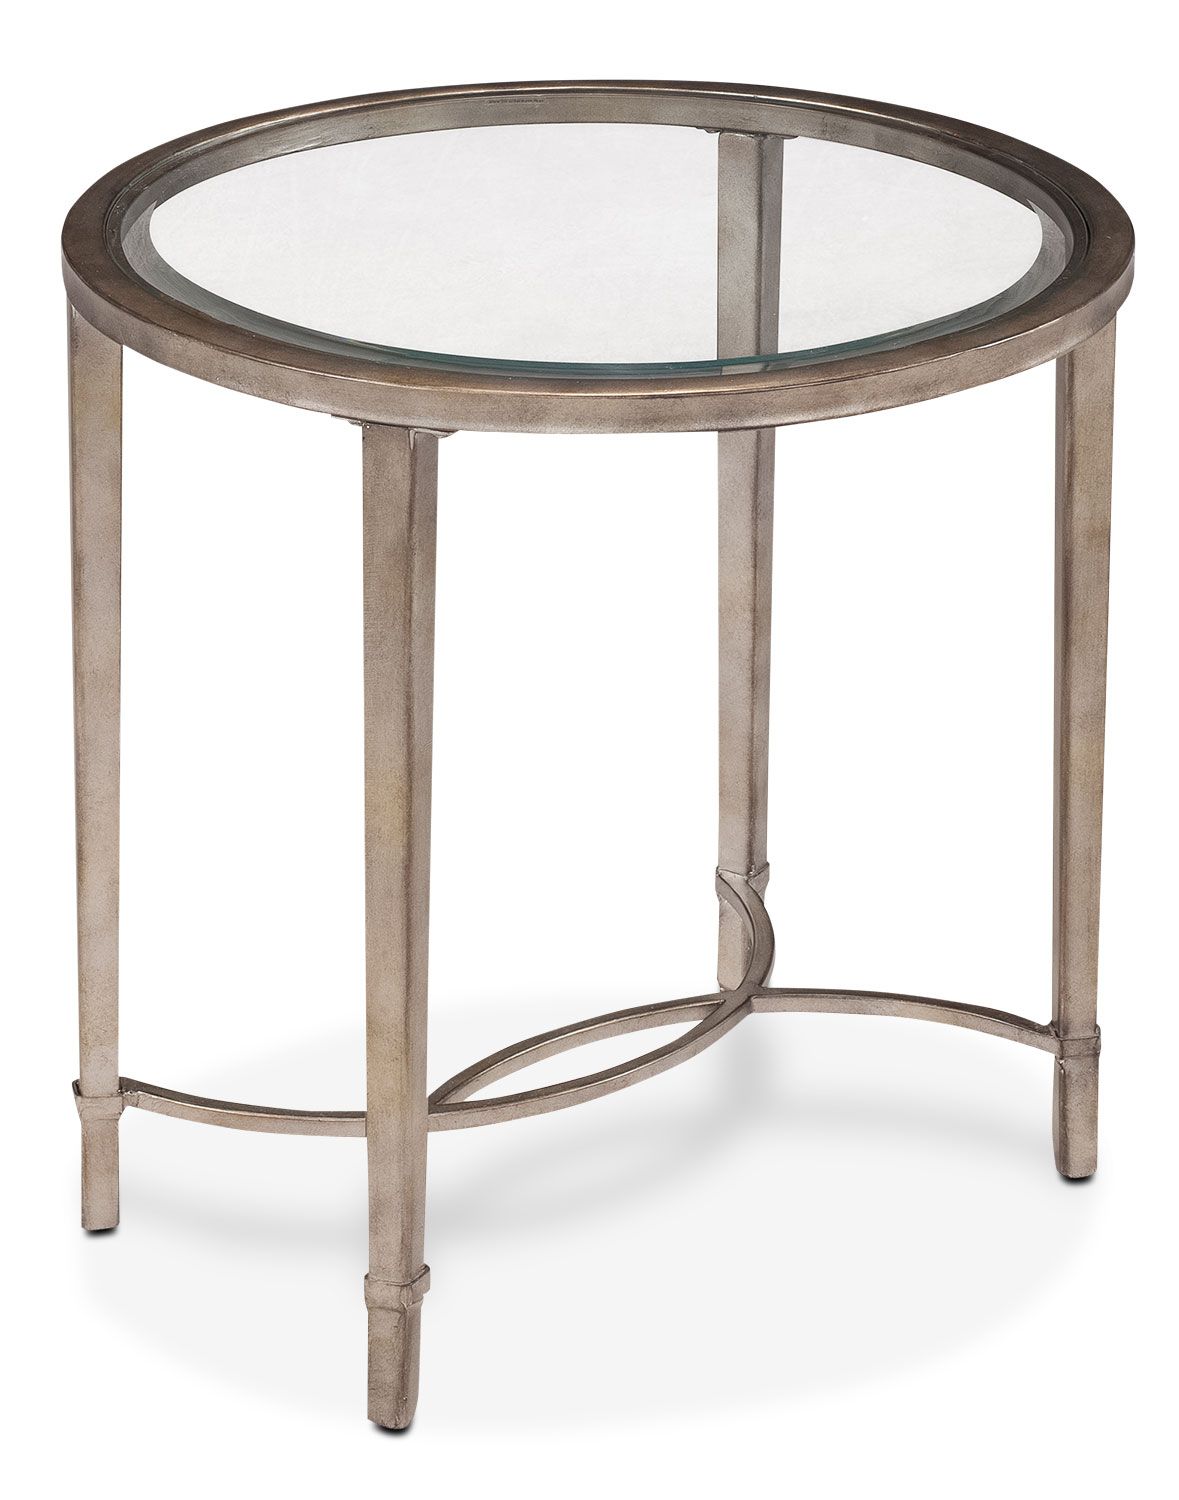 accent and occasional furniture only copia end table glass gold room essentials side hallway ideas mirror coffee ikea west elm dining set target cabinet unfinished round old